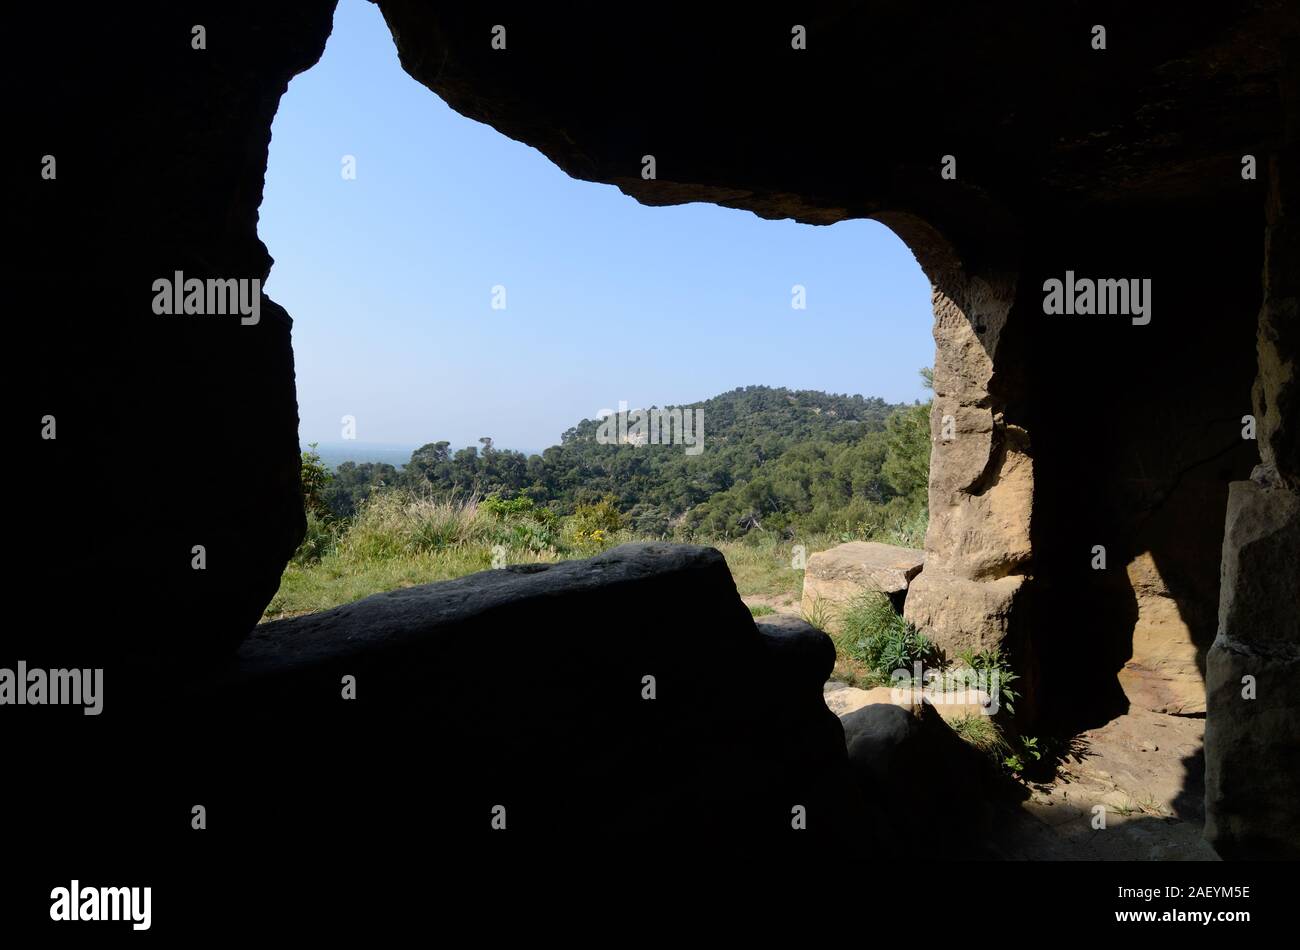 View From Prehstoric Cave Dwelling in Abandoned Troglodyte Village, Grottes de Calès, with Rock-Cut Houses at Calès Lamanon Alpilles Provence France Stock Photo